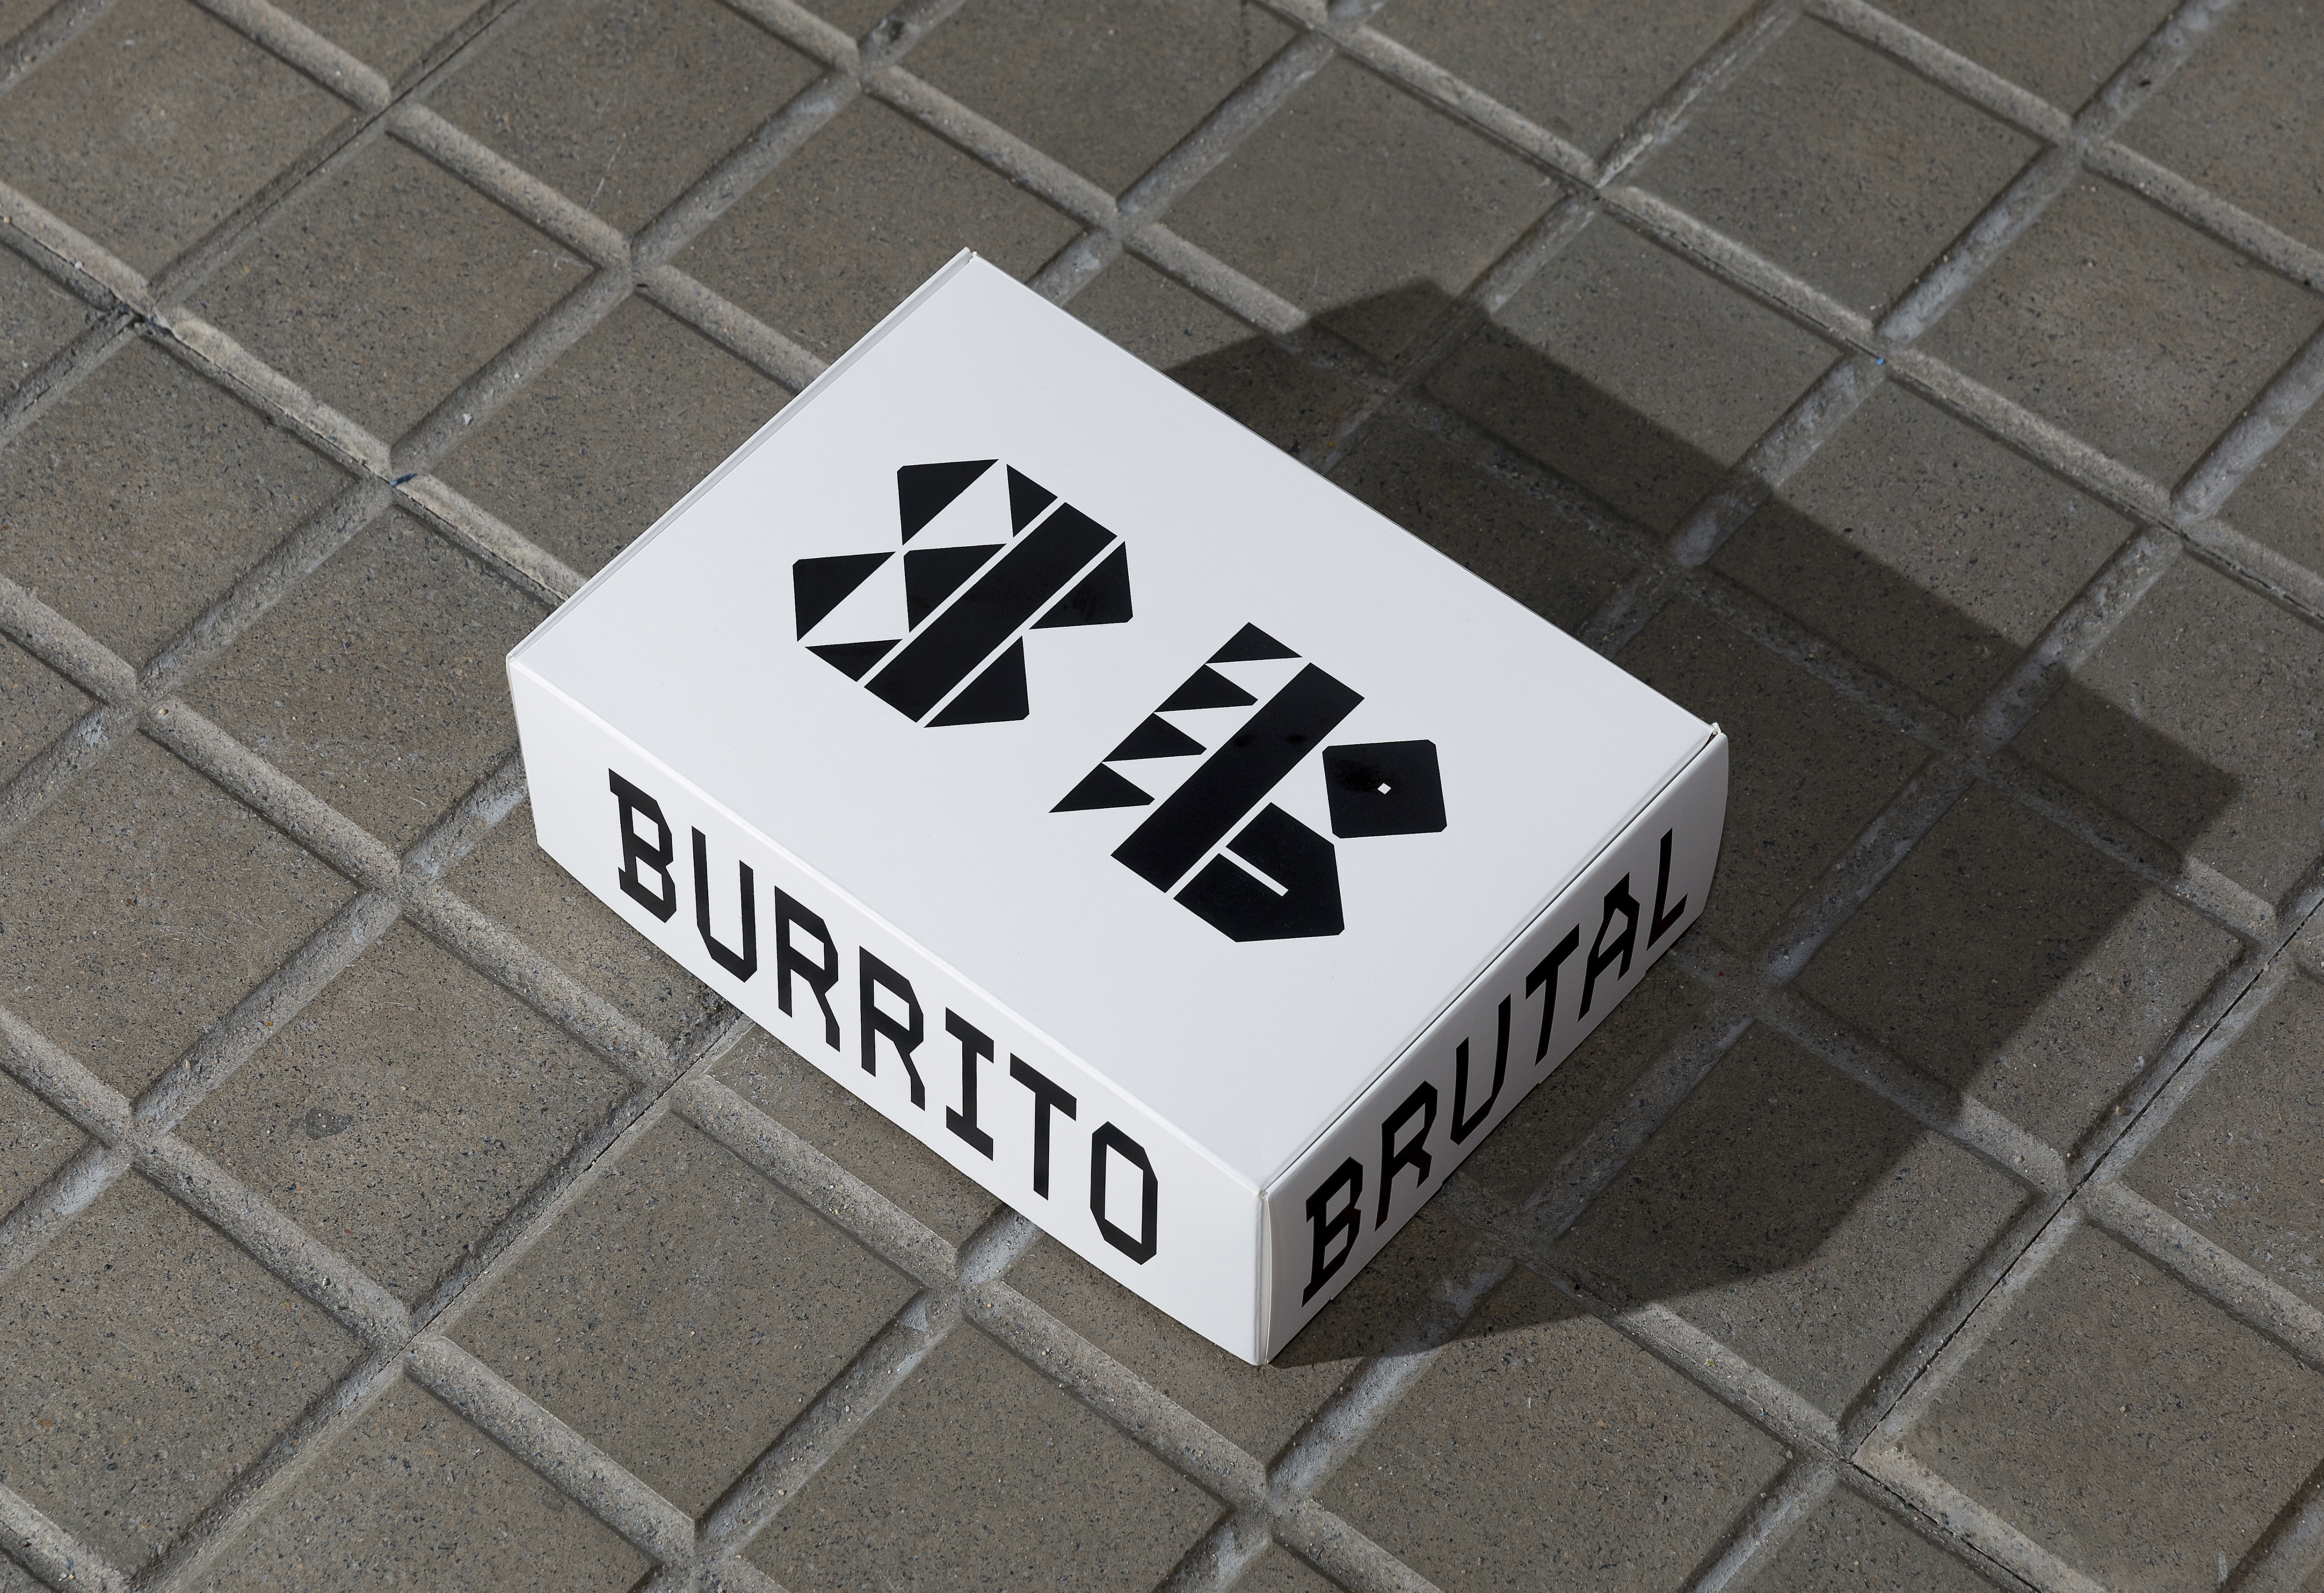 New logo and packaging for Madrid-based Brutal Burrito by Tres Tipos Gráficos